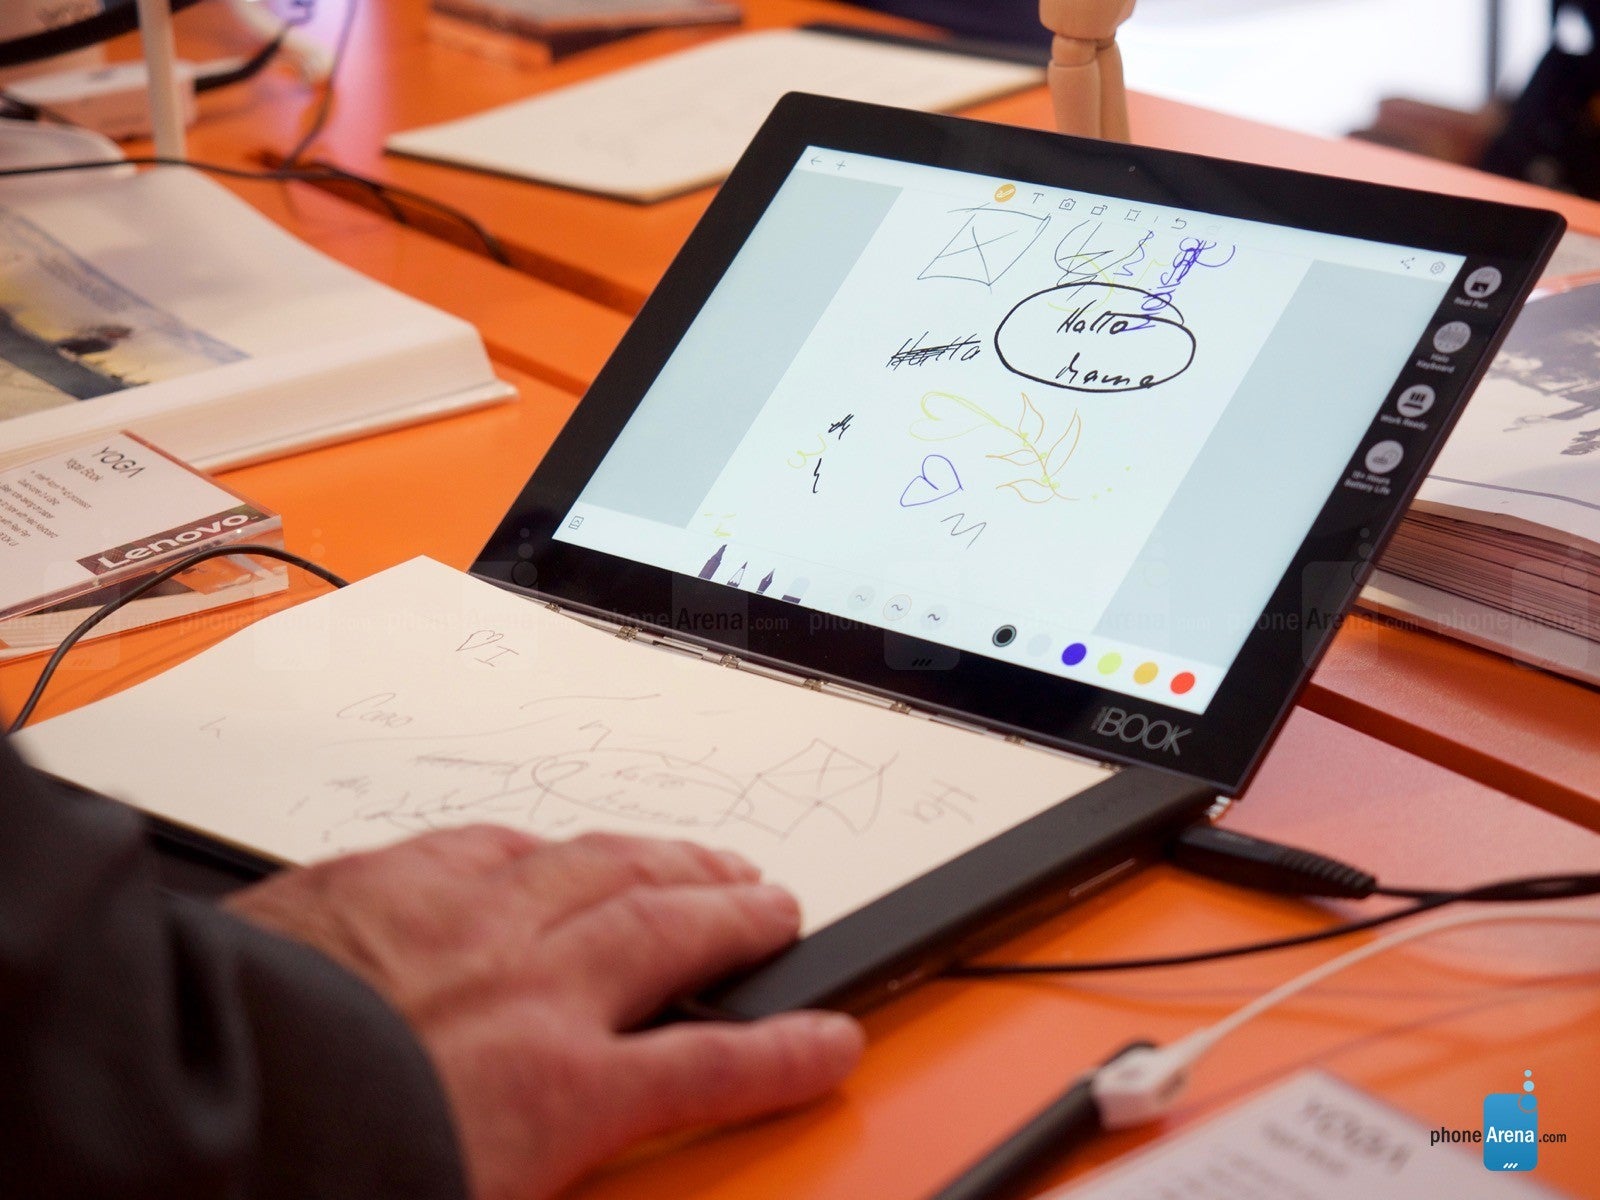 Lenovo Yoga Book preview: Hey look, it's a tablet with a notepad!